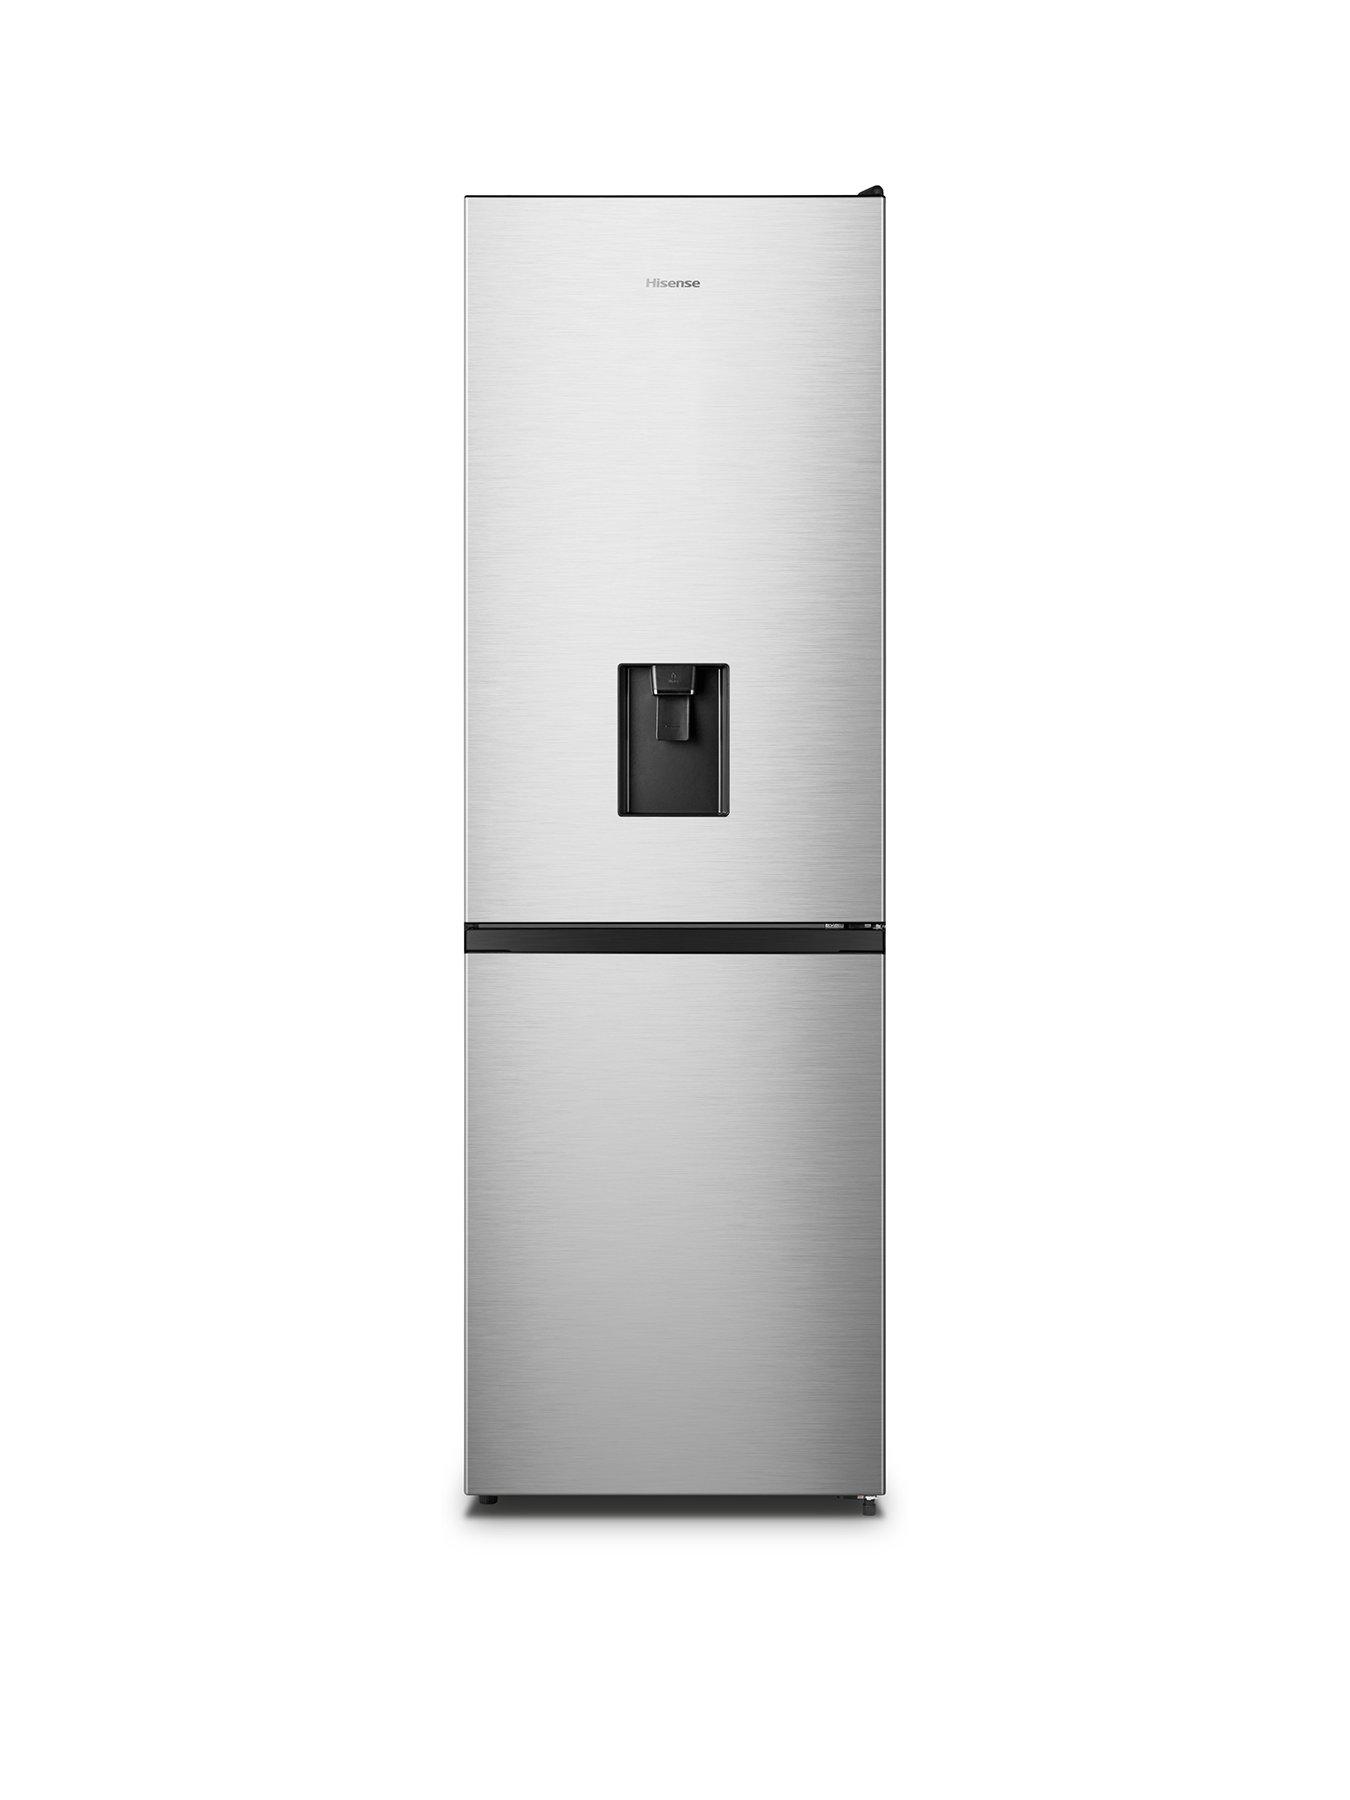 Hisense Rb390N4Wce 60Cm Wide, Total No Frost, Freestanding Fridge Freezer - Stainless Steel